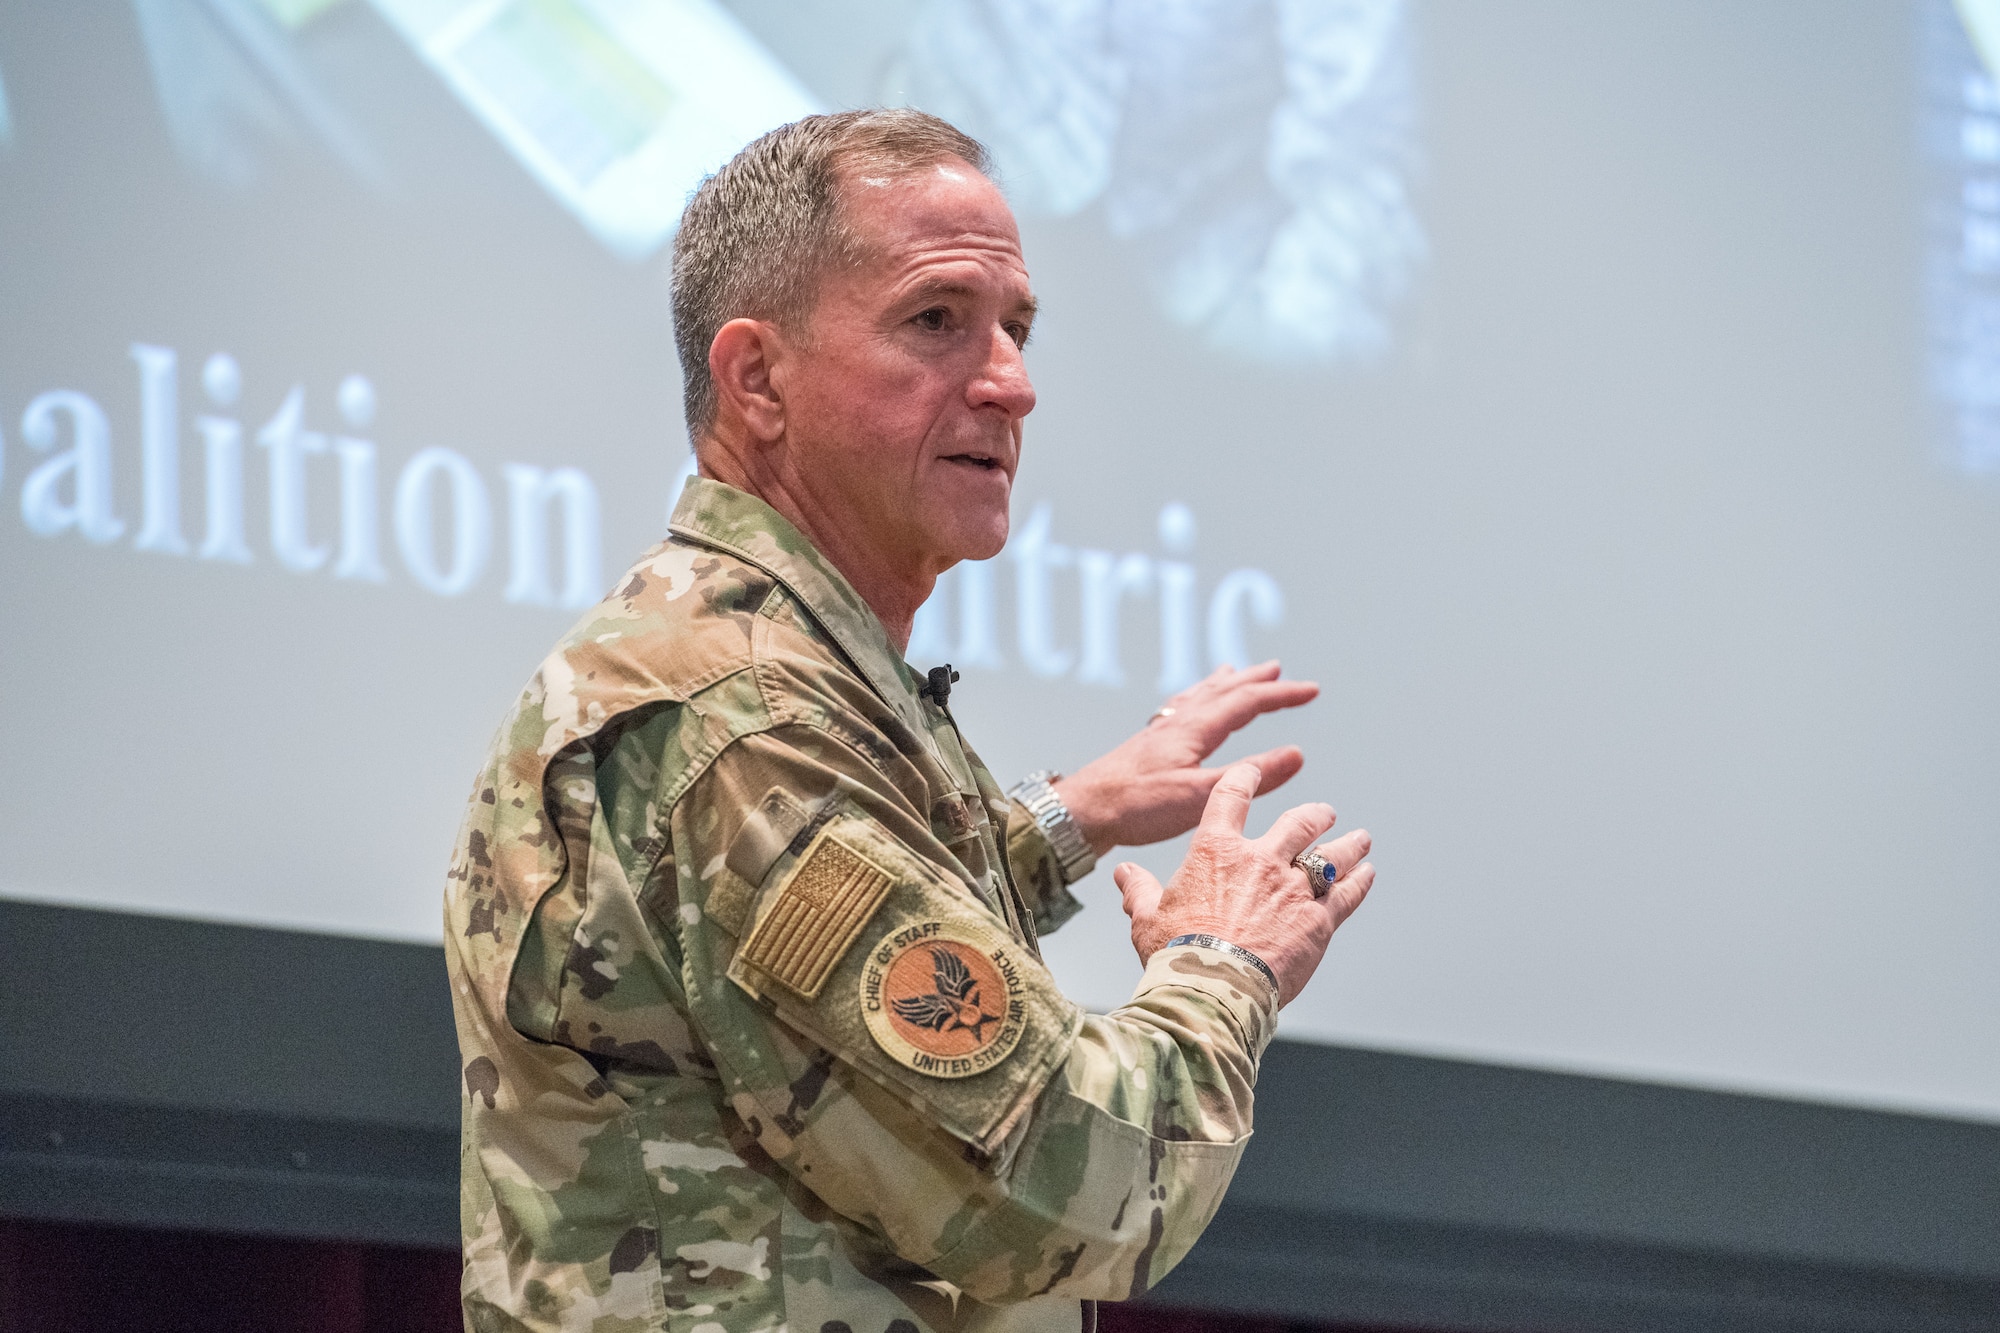 Air Force Chief of Staff Gen. David L. Goldfein speaks to the incoming Air War College class during his visit to Air University Aug. 7, 2019, at Maxwell Air Force Base, Alabama. Goldfein challenged the students to accomplish three tasks while at AWC: to re-blue, reconnect and recharge. (U.S. Air Force photo by William Birchfield)